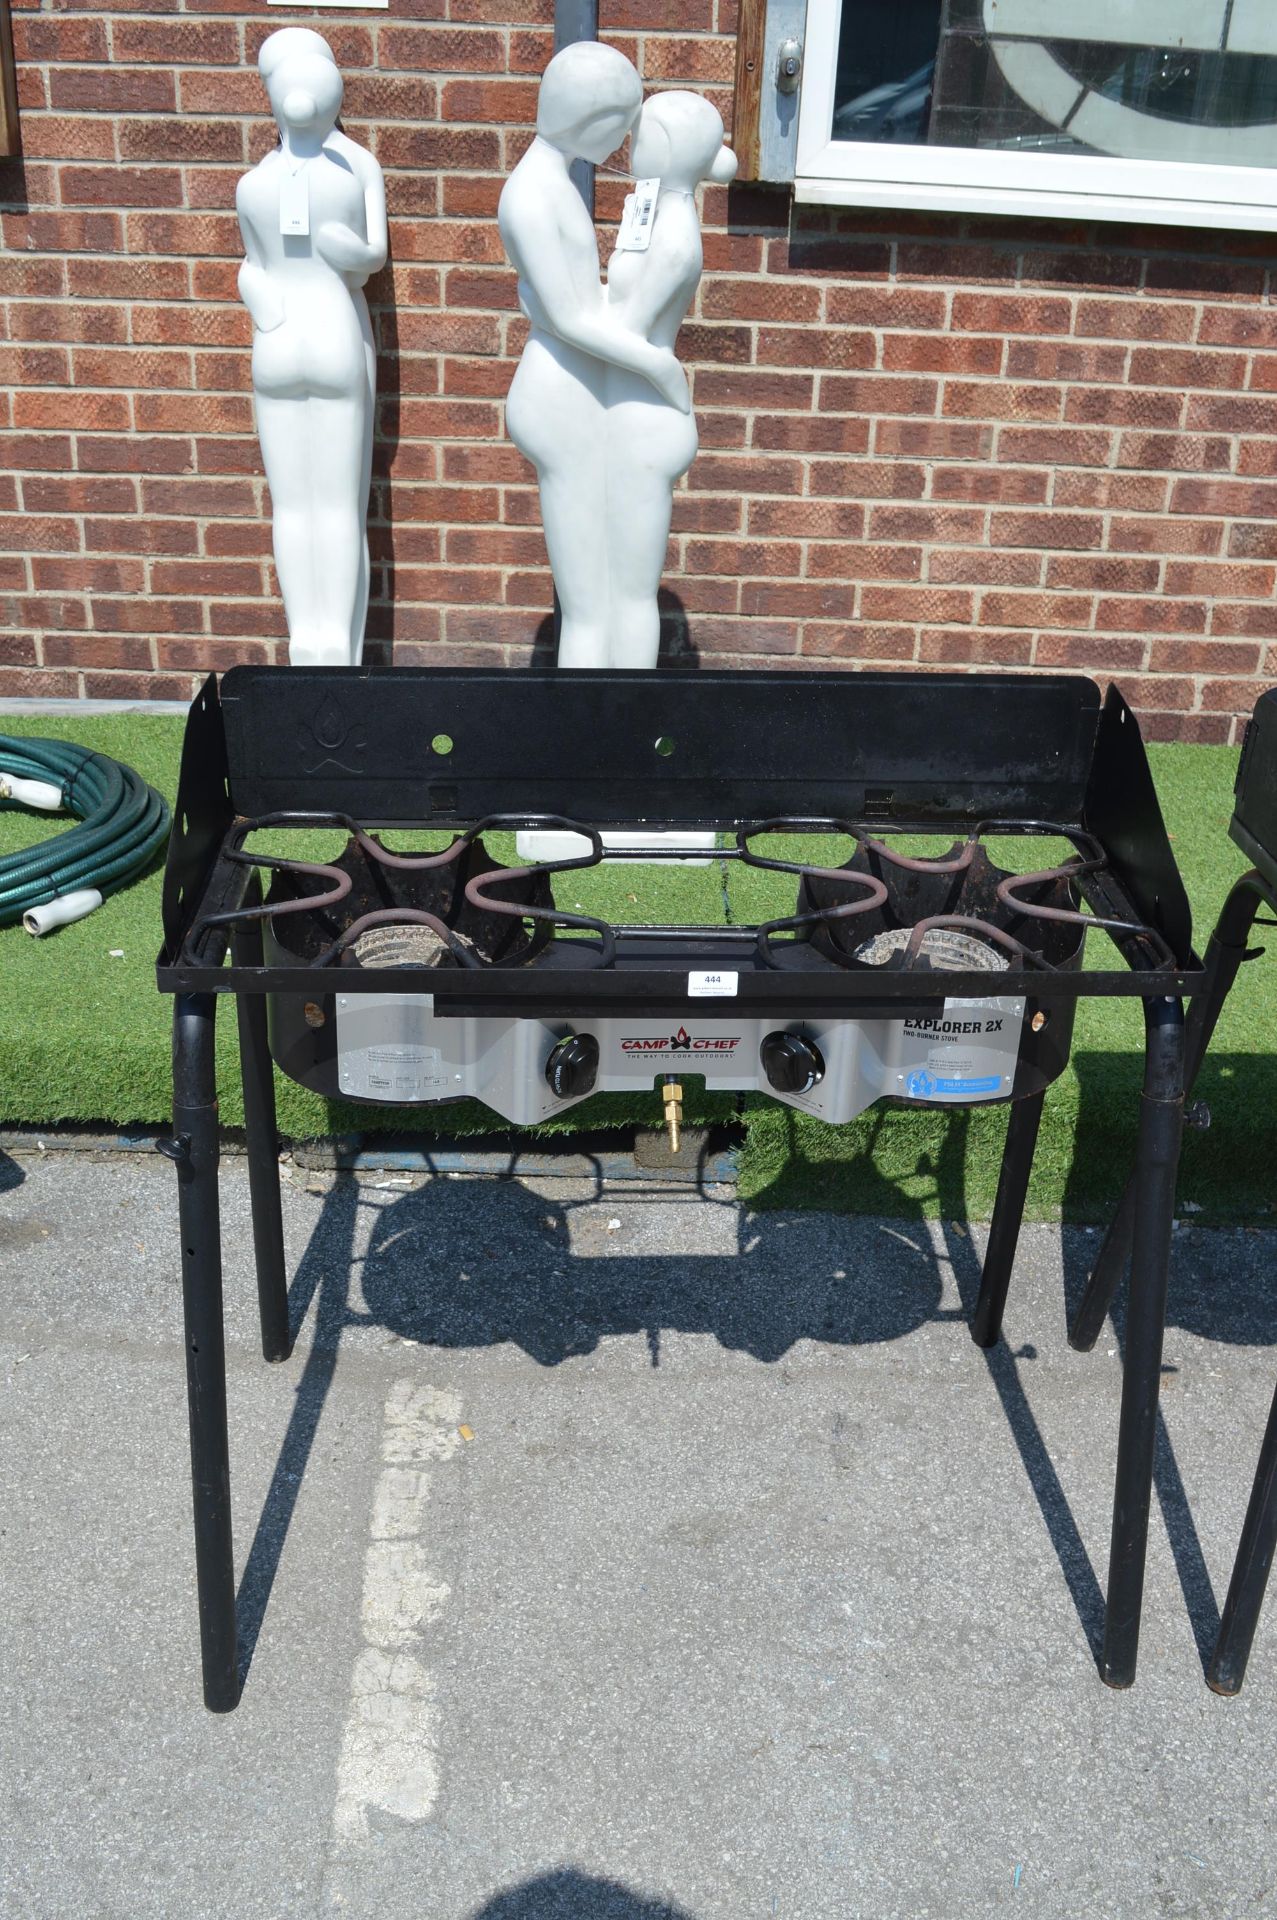 *Camp Chef Explorer 2X Two Burner Barbecue (missing grill pans and gas pipes)